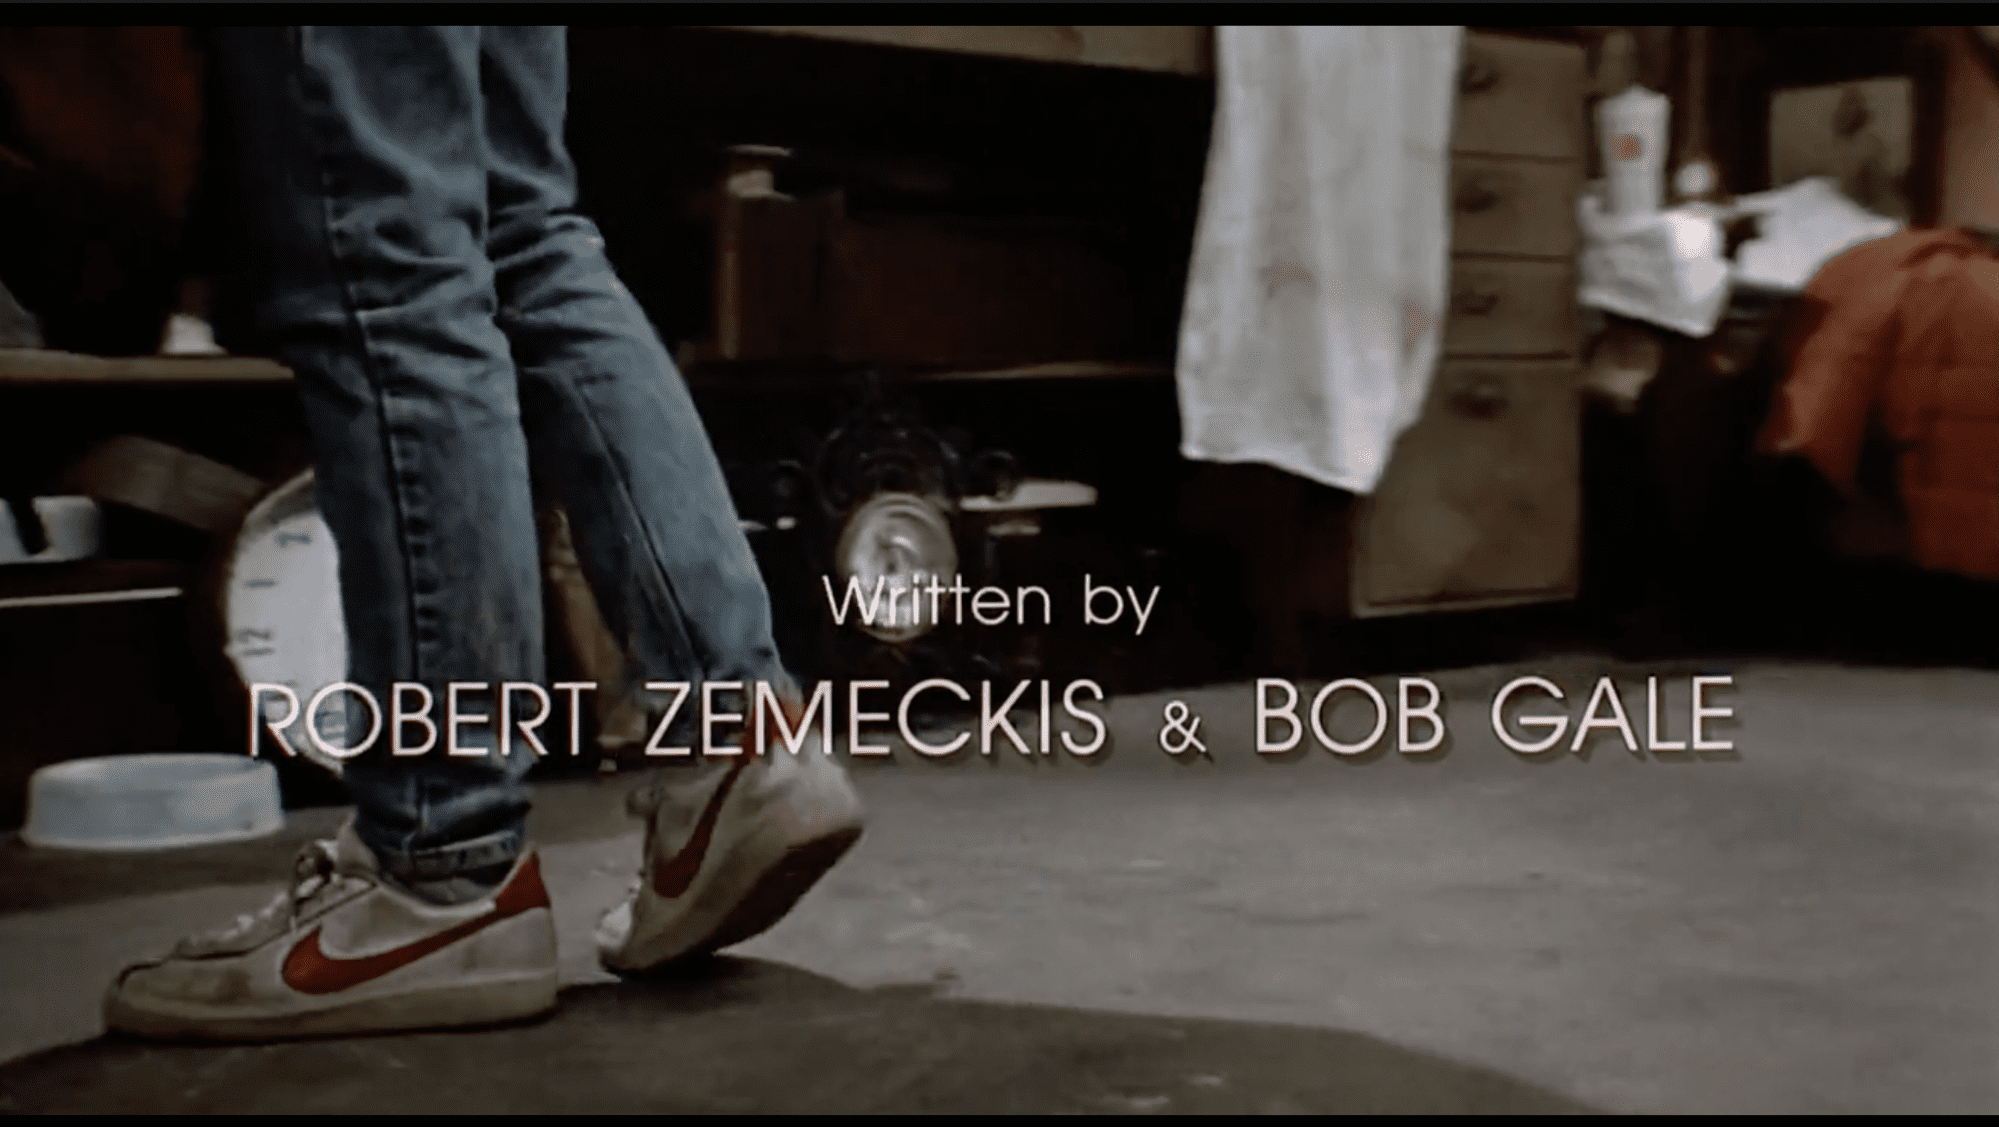 The protagonist in Back to the future also wears shoes from Nike